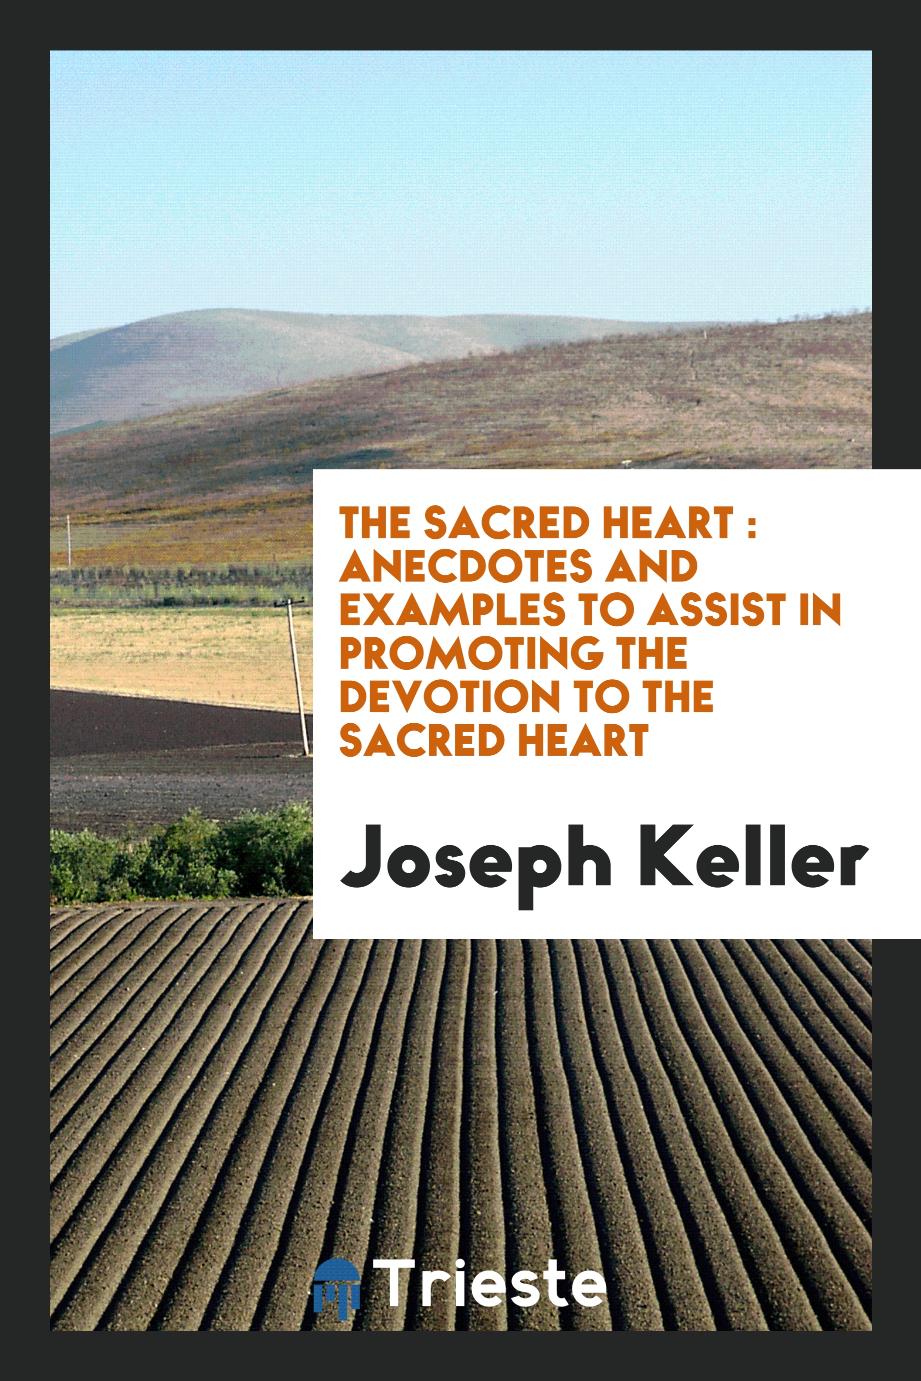 The Sacred Heart : anecdotes and examples to assist in promoting the devotion to the Sacred Heart